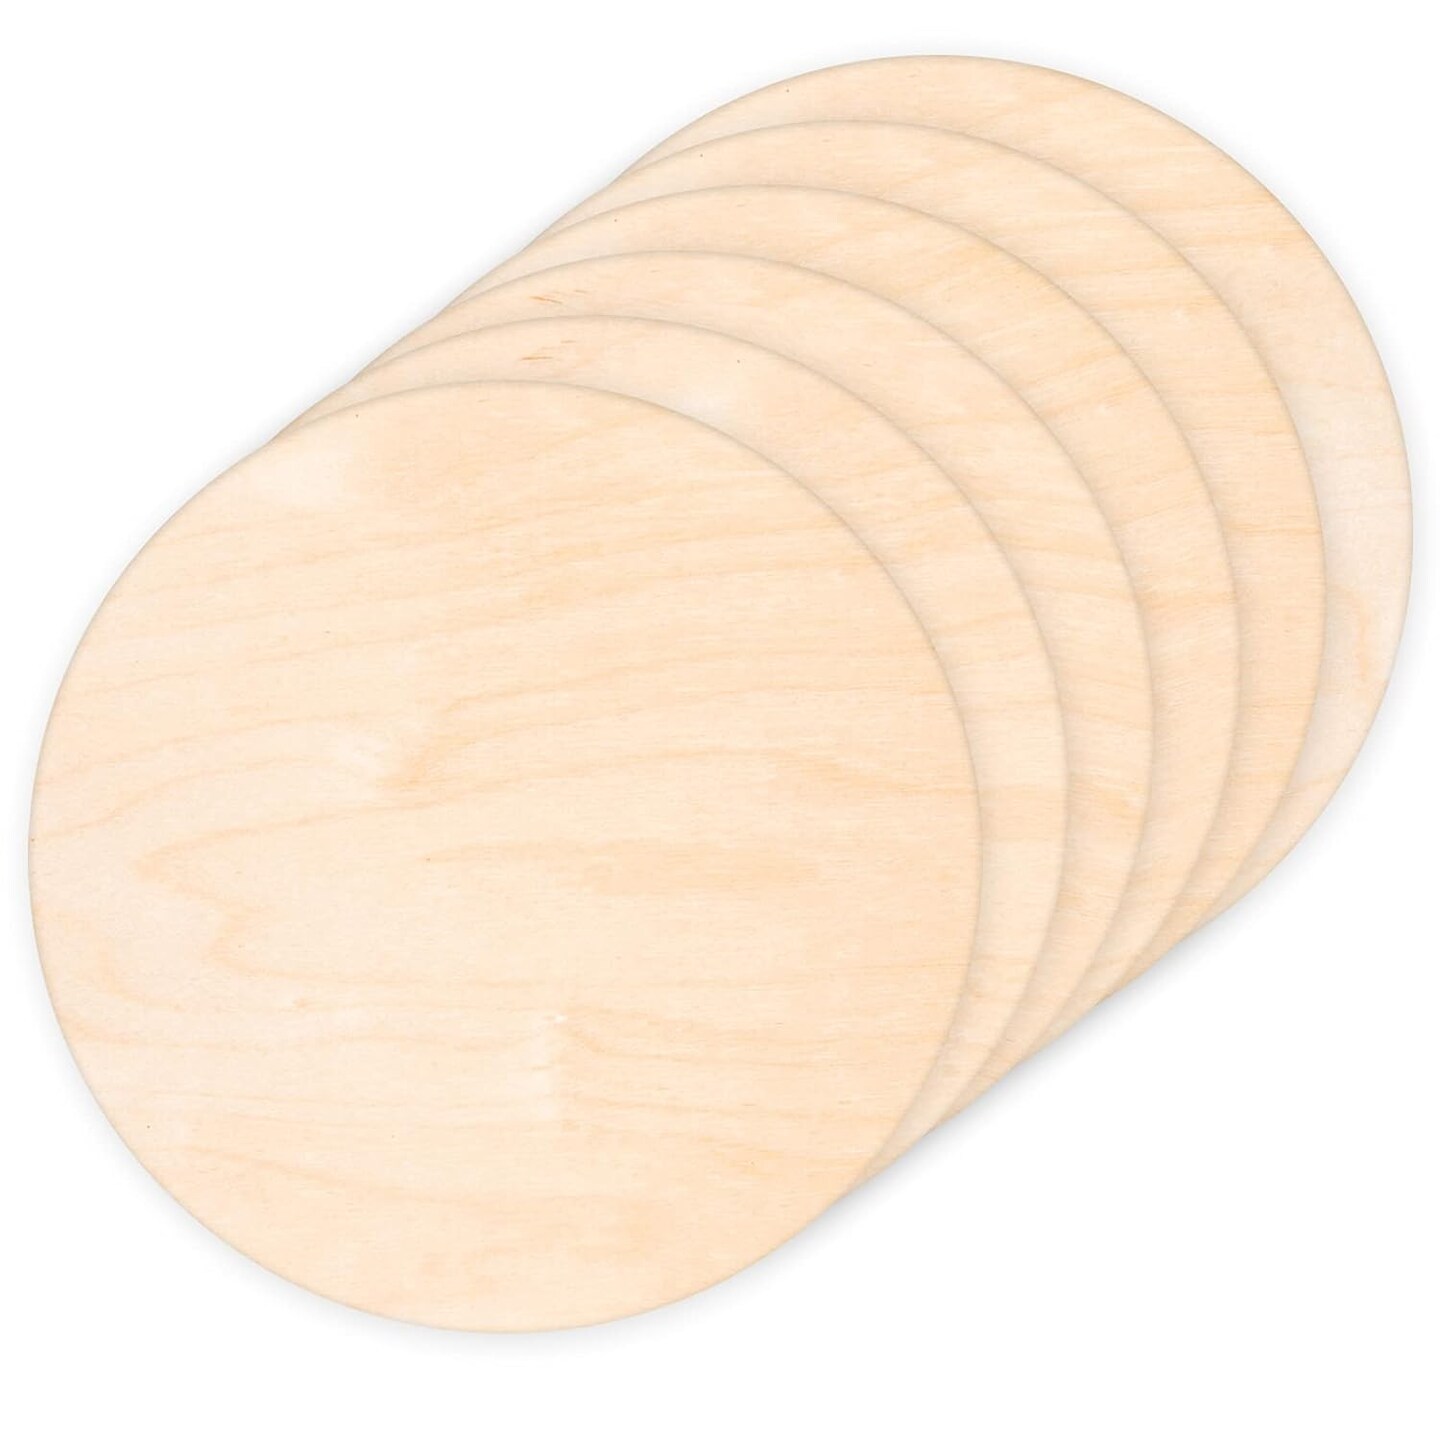 6 Pack 14 Inch Wood Rounds,14 Inch Round Wood Circles For Crafts, Unfinished Wood Circles Wood Sign Blank, Wooden Discs For Diy Crafts, Door Hangers And Christmas Decoration